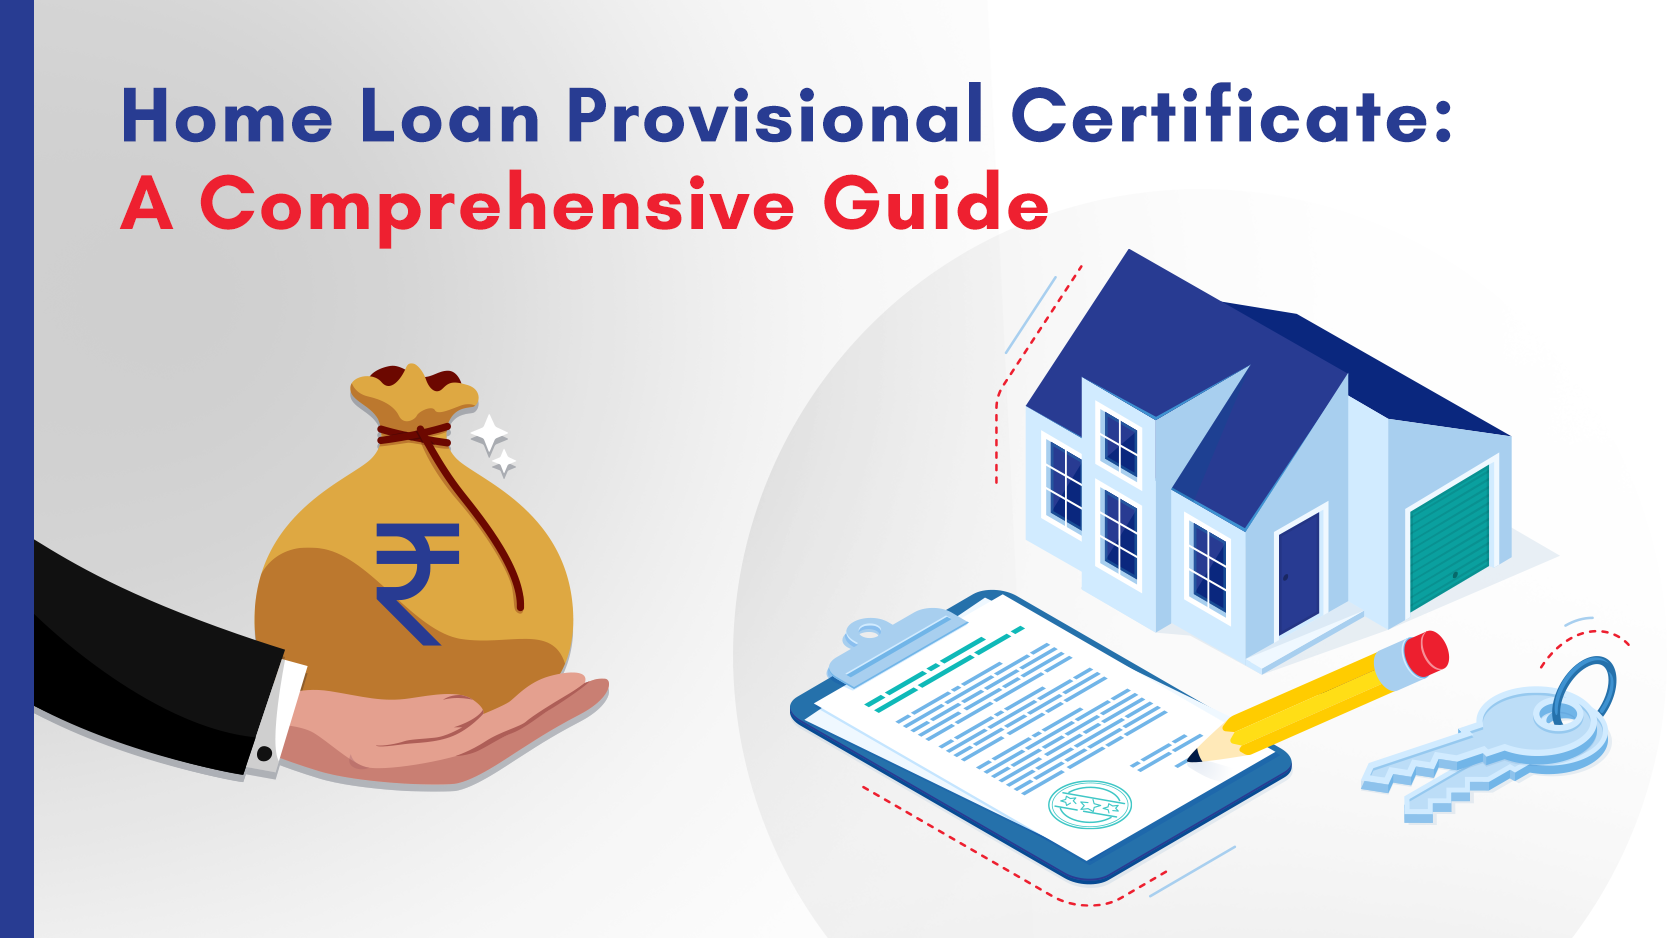 Home Loan Provisional Certificate: A Comprehensive Guide